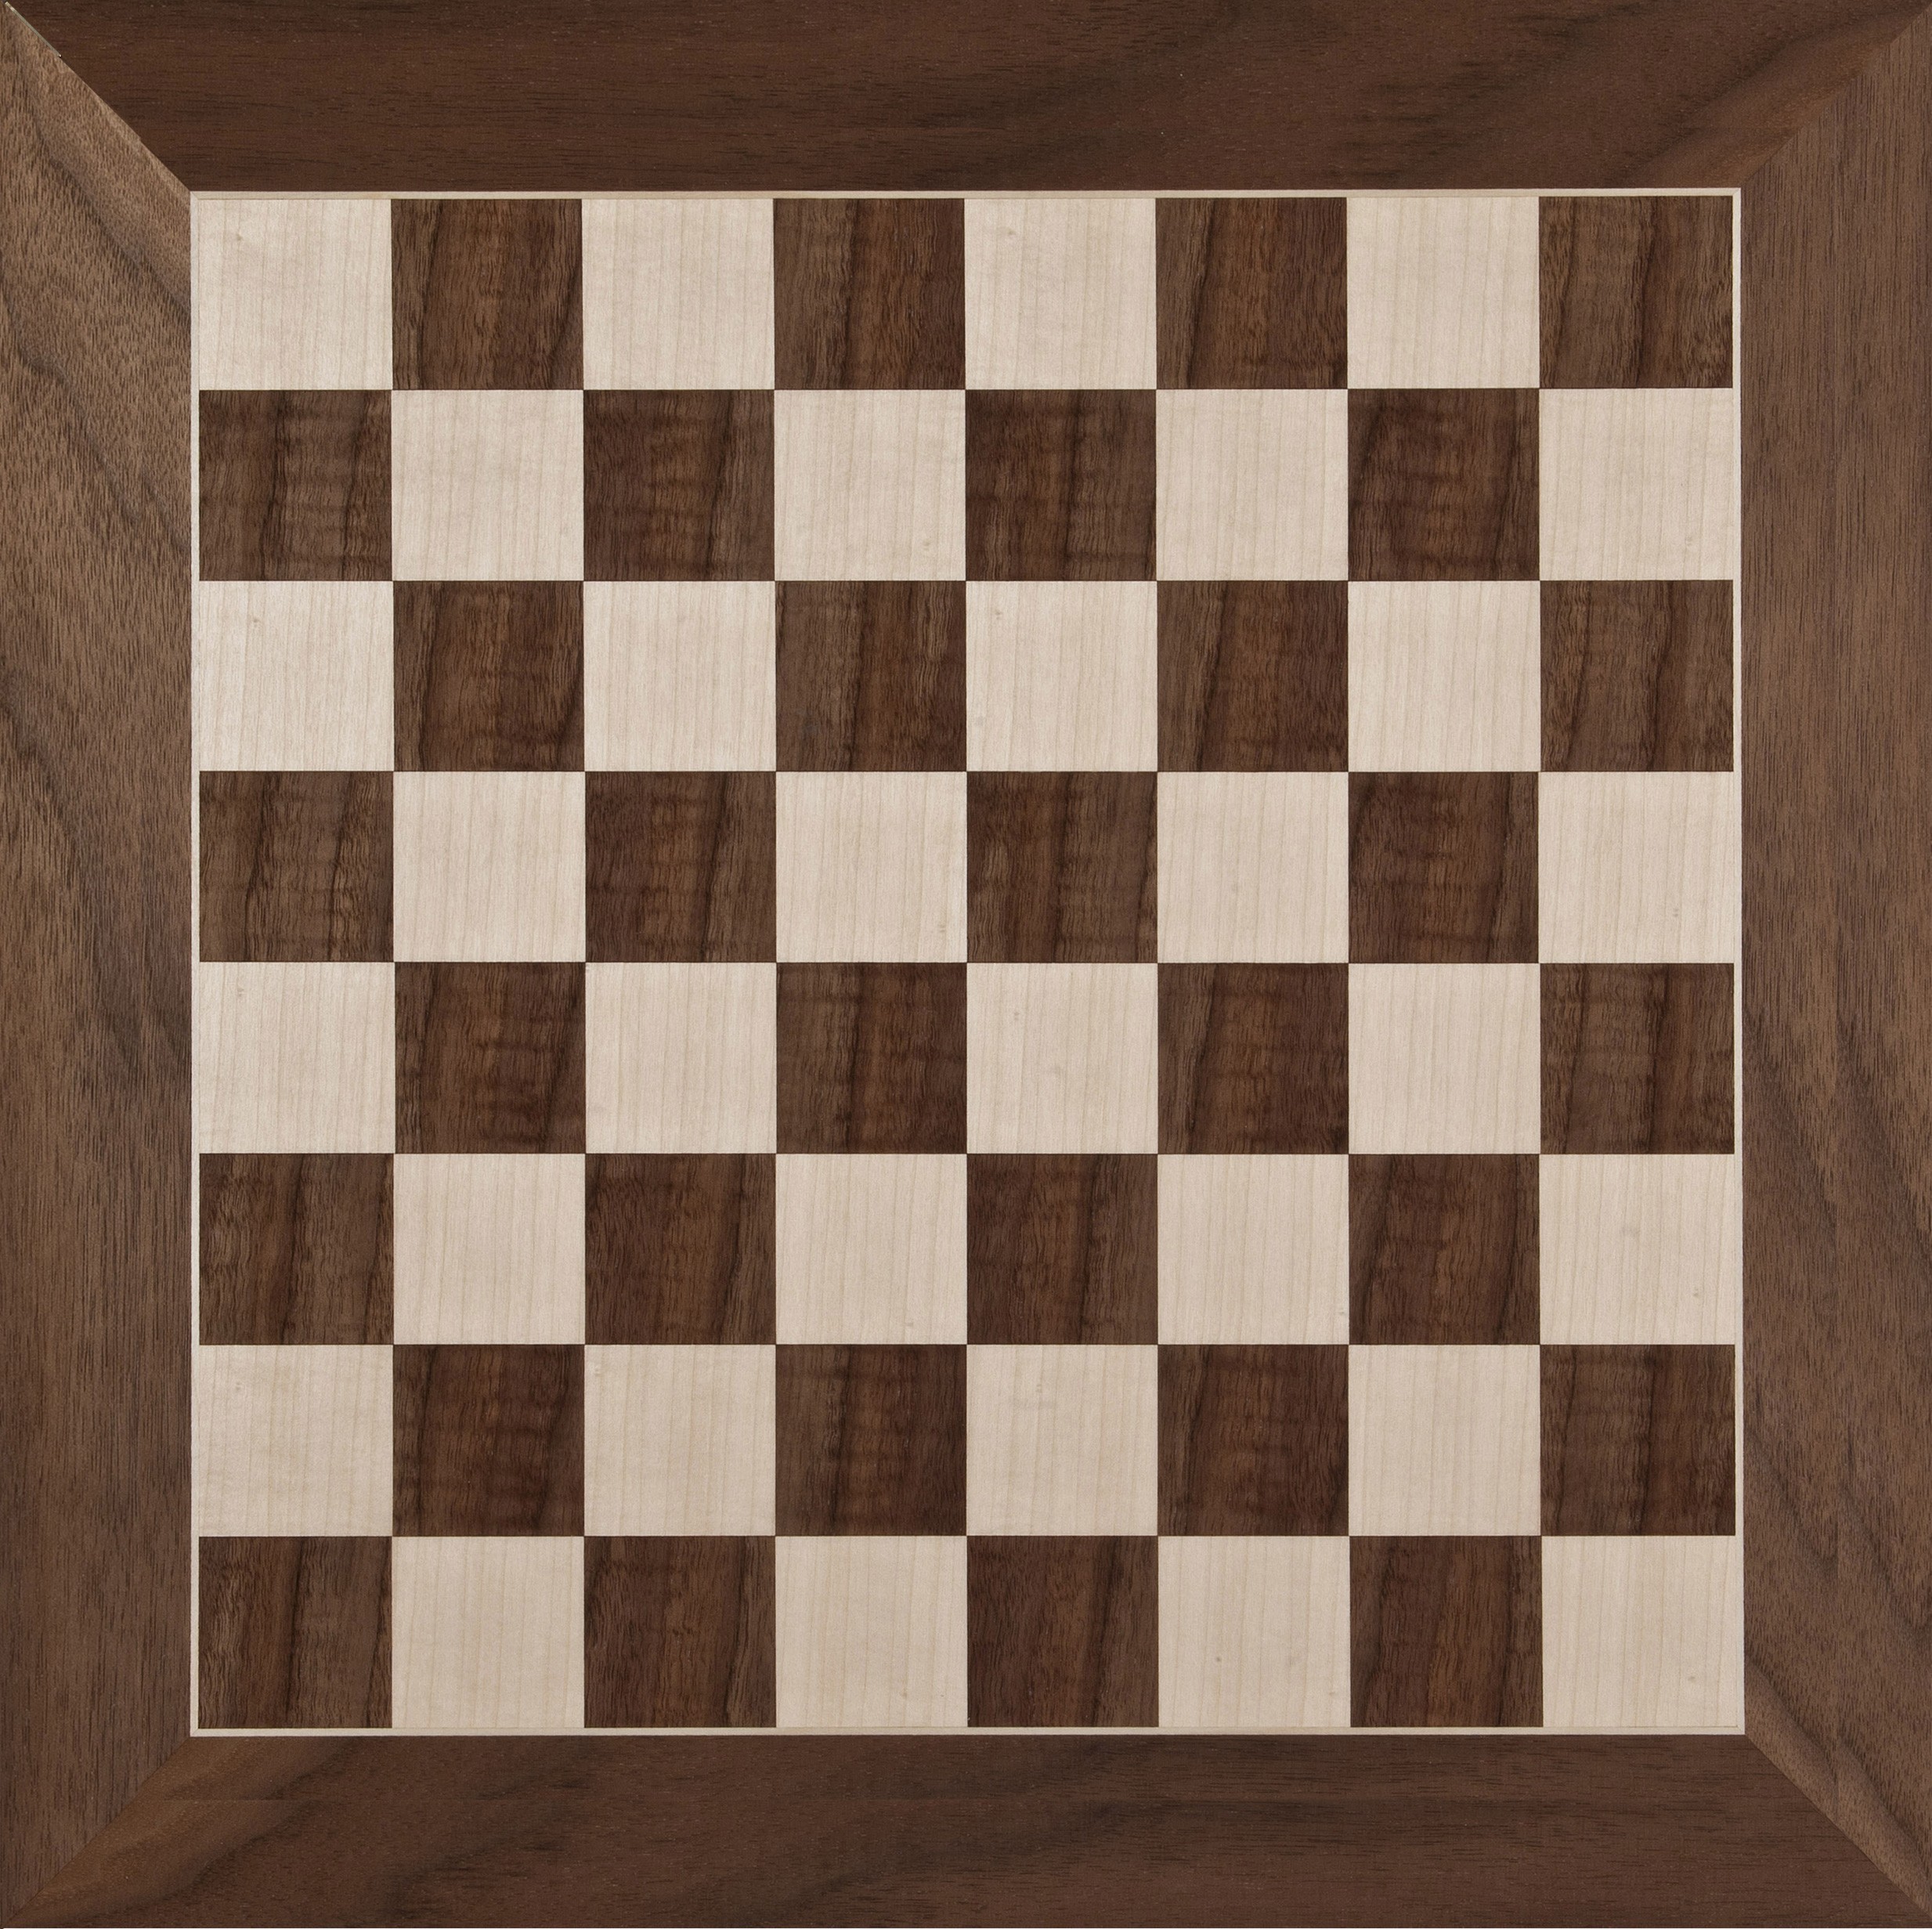 Master Chess Board from Spain